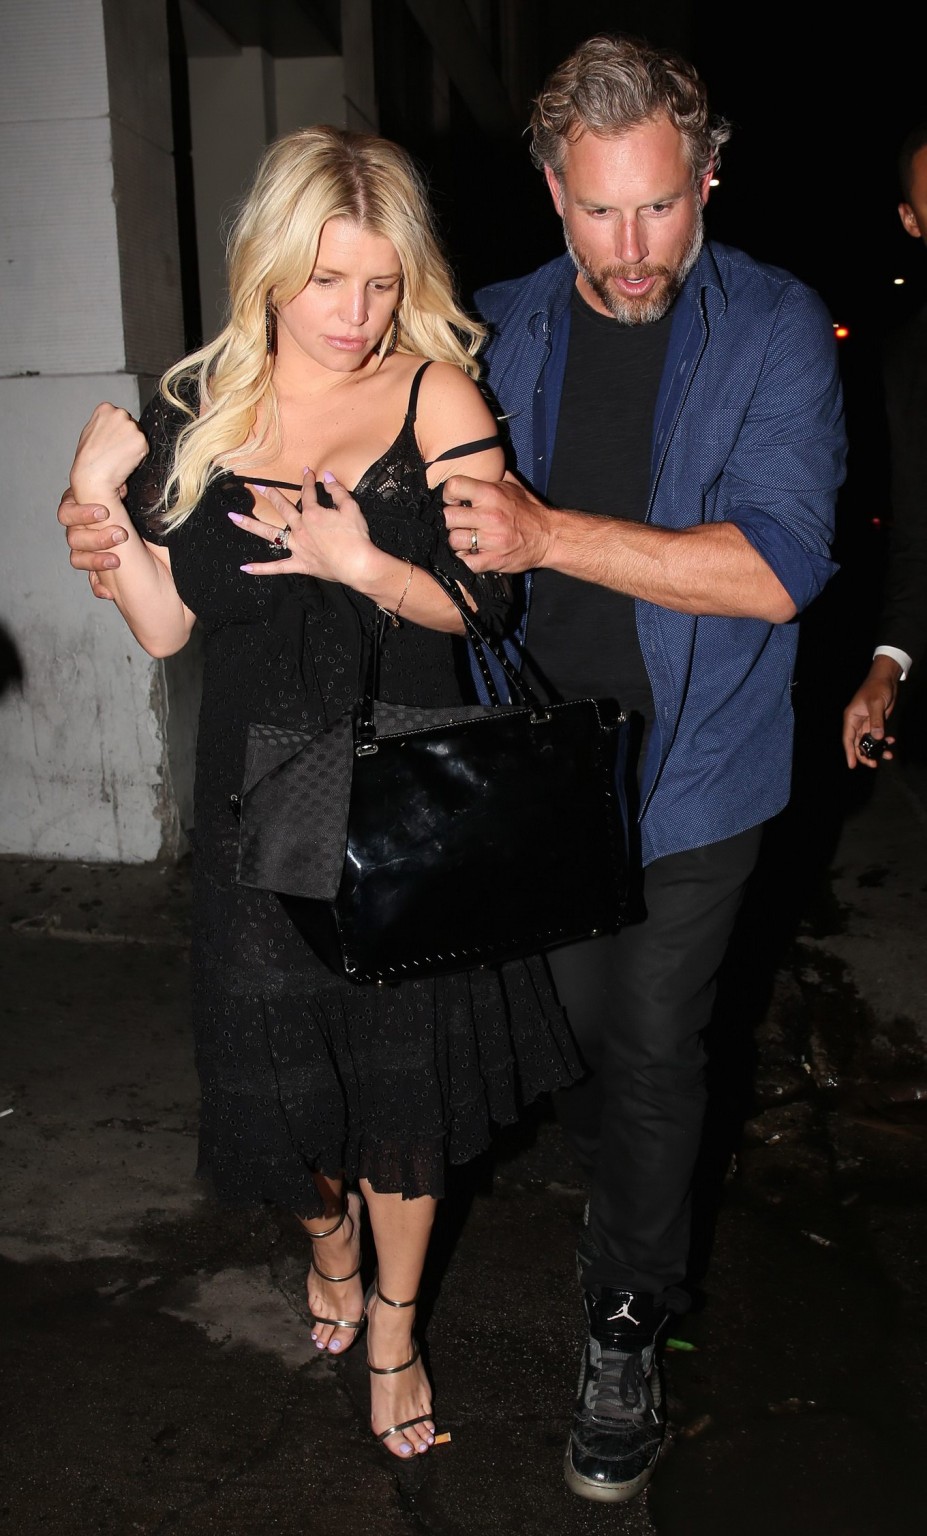 Jessica simpson wardrobe malfunction while stumbling out of sayers club in holly
 #75162395